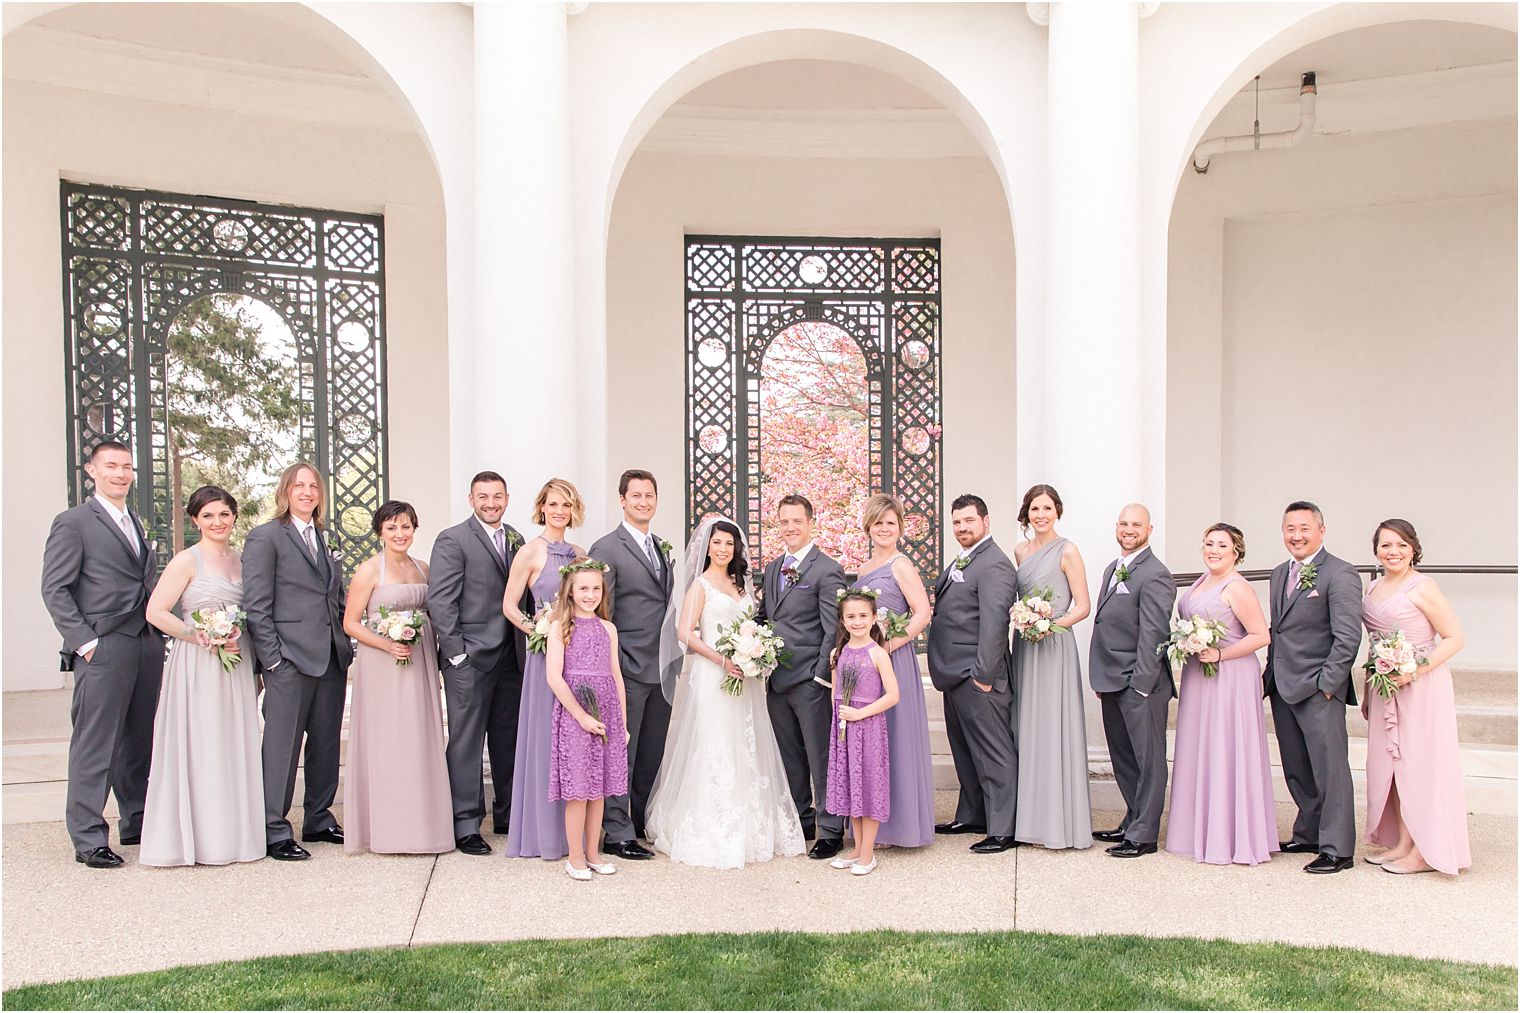 Bridal party in purple and gray